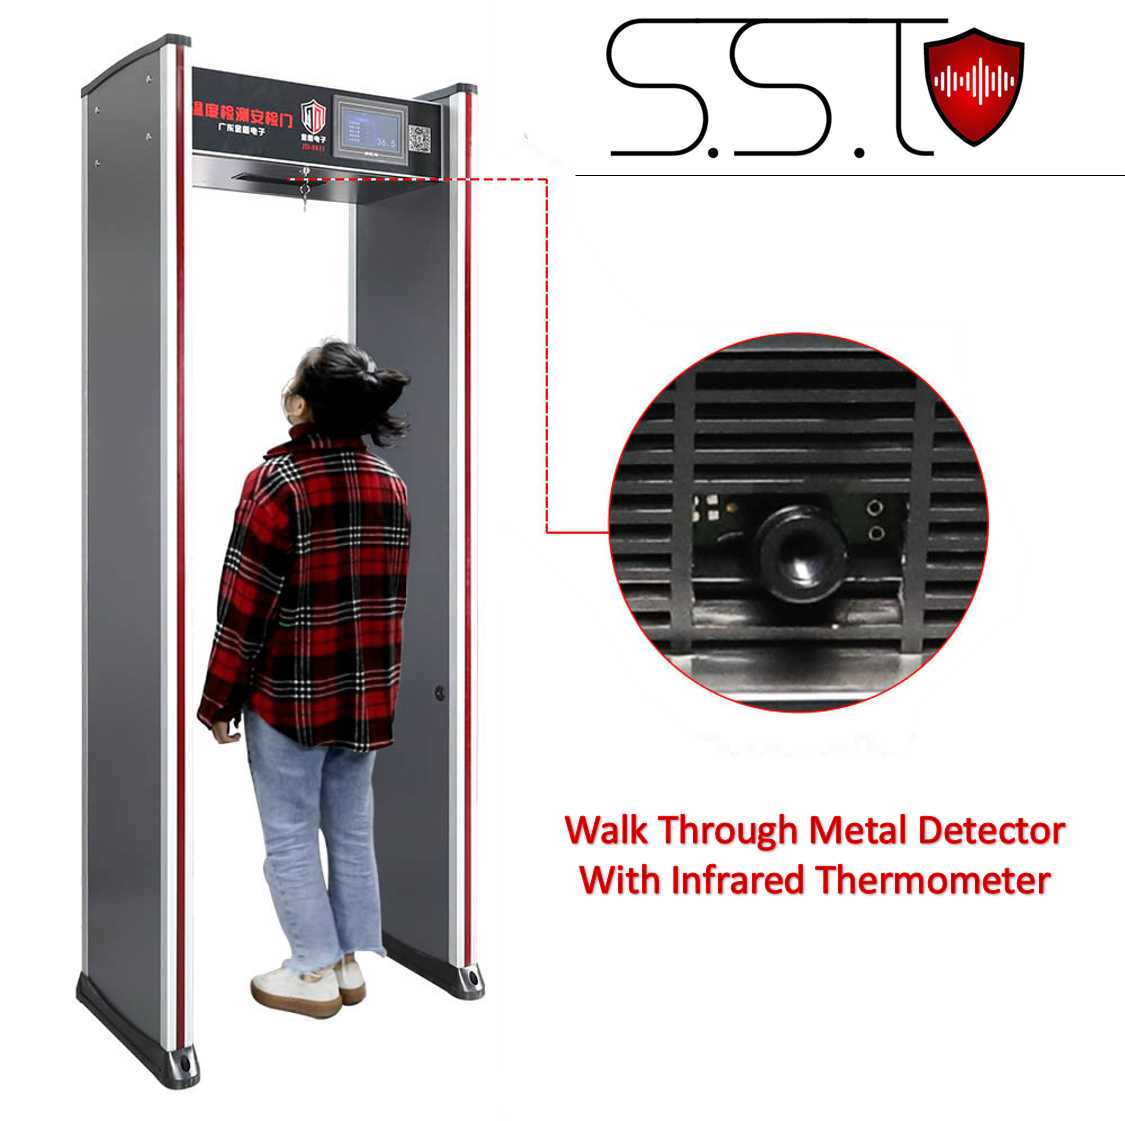 Walk Through Metal Detector With Infrared Thermometer For Sale, Sound And Safety Technologies, SST , S&ST , SSTechnologies Sri Lanka.